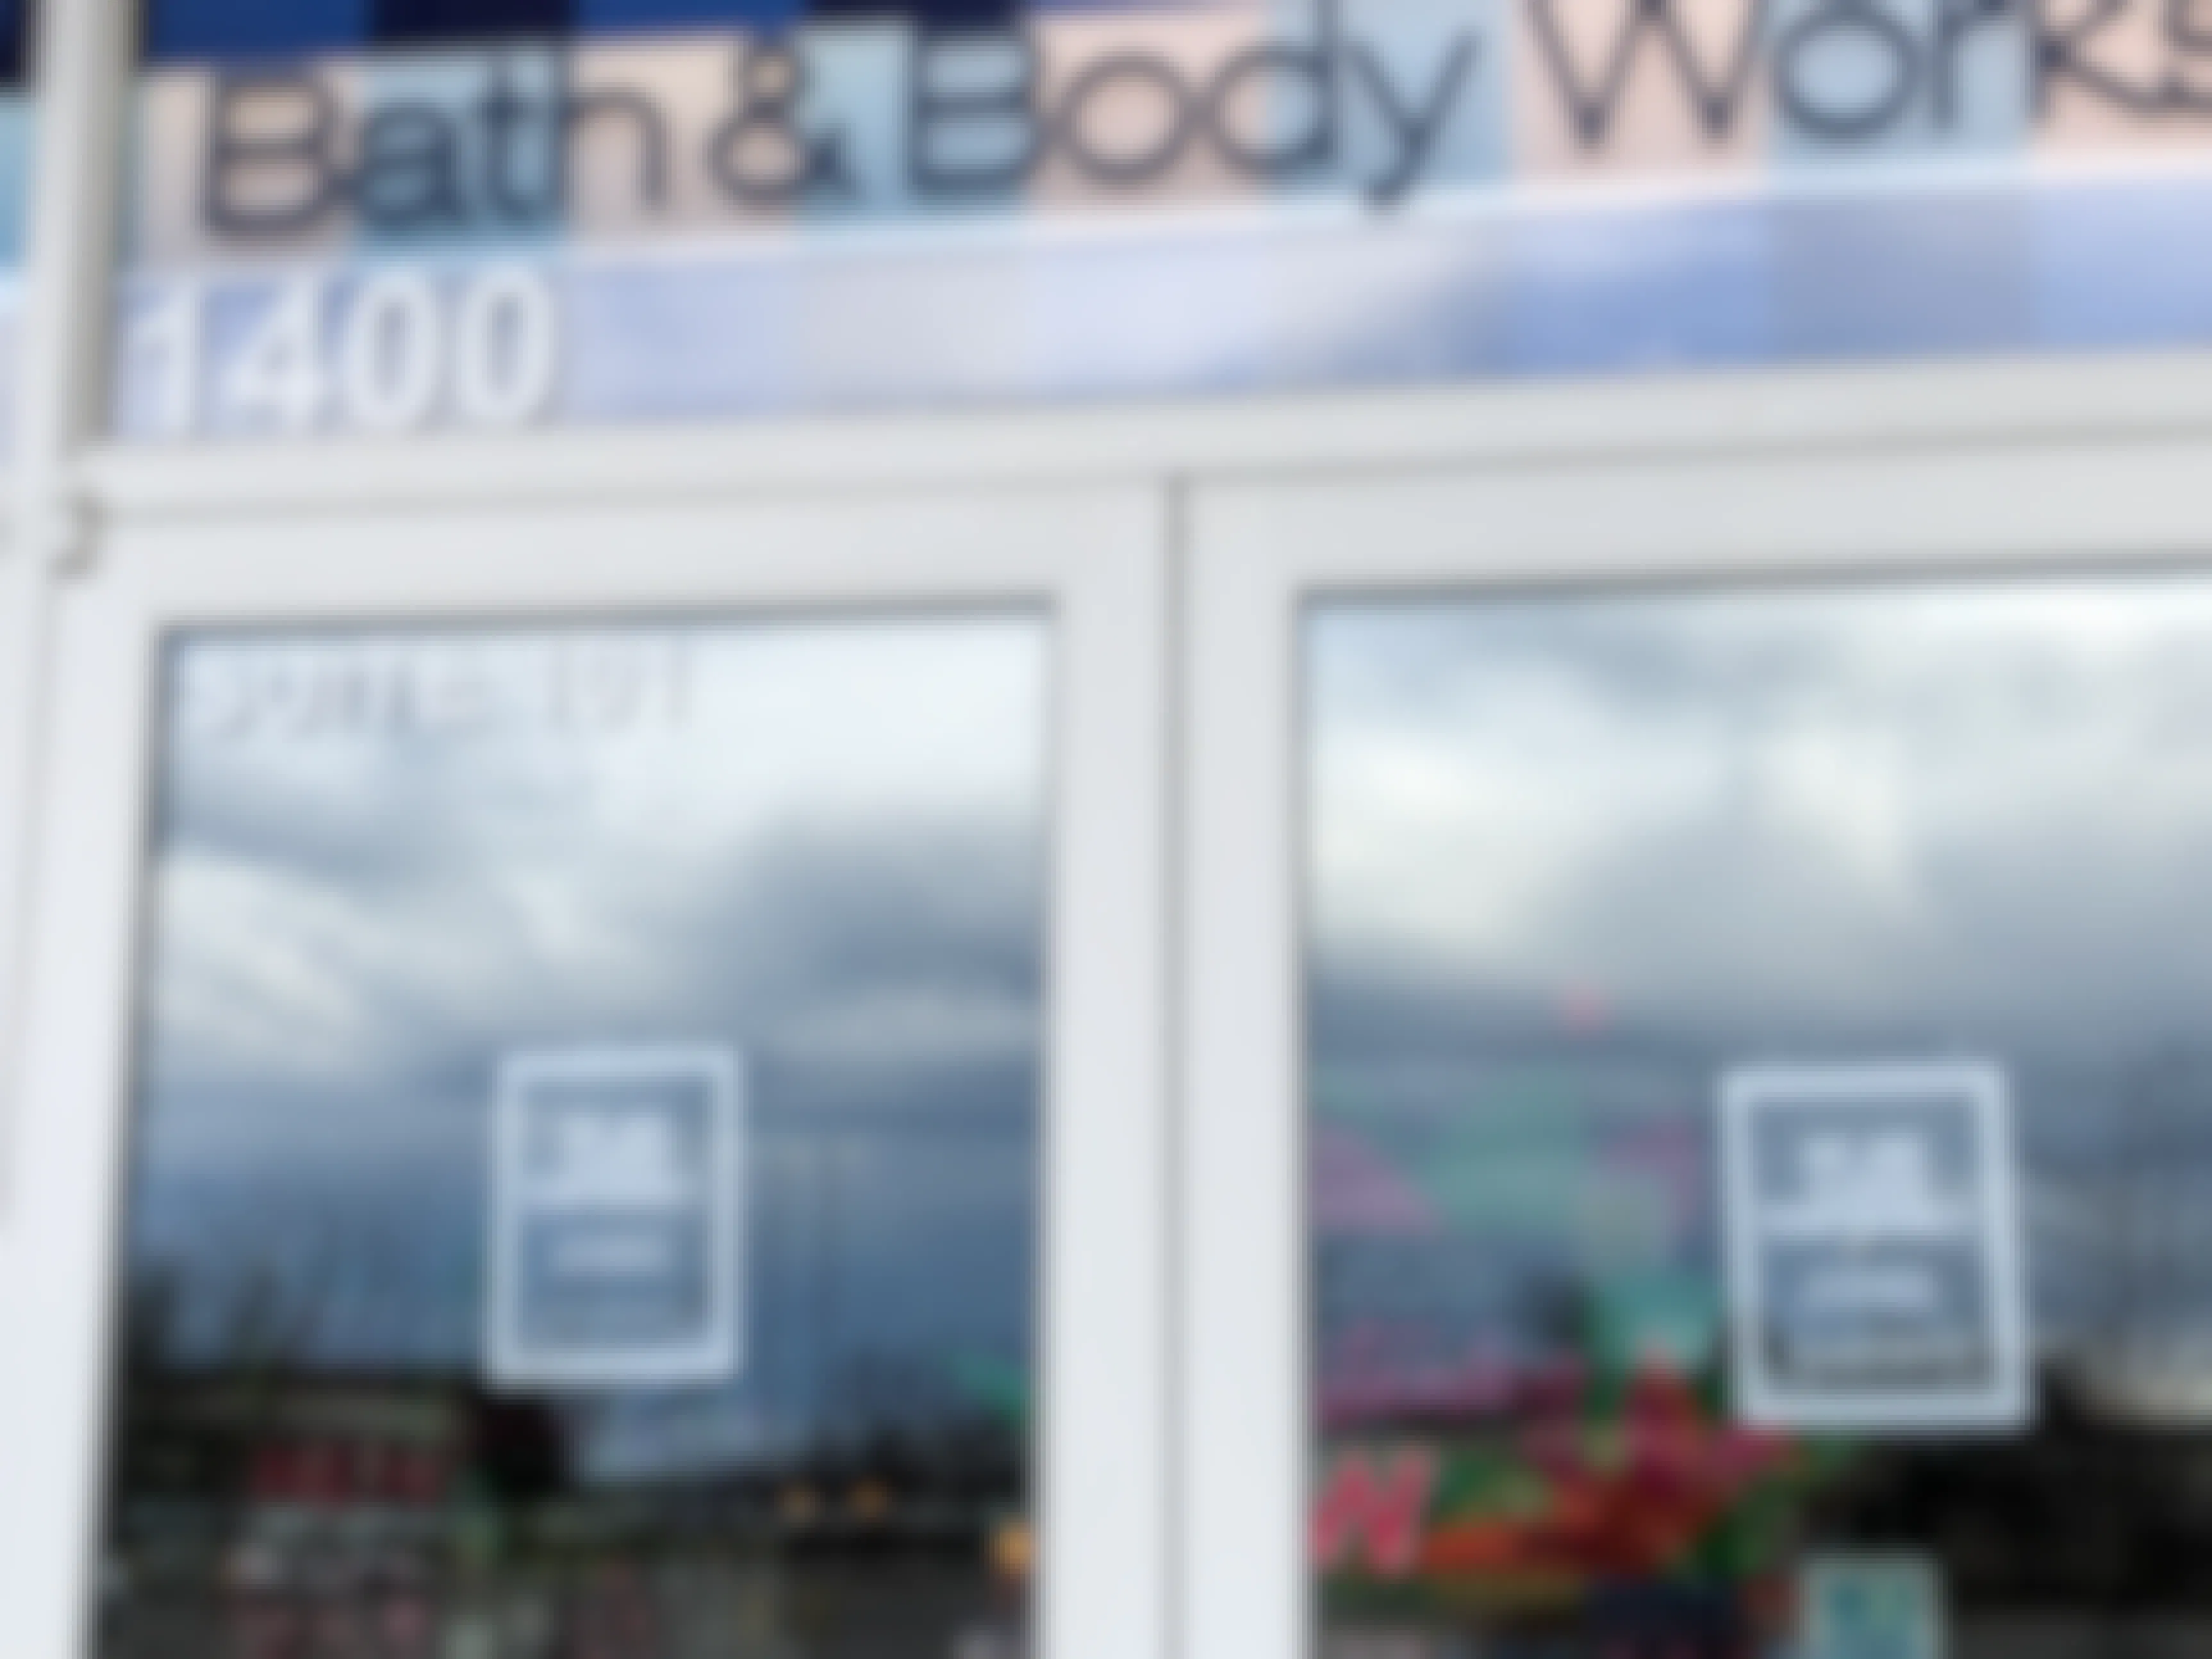 The front of the Bath and Body works store with a closed sign for coronavirus.